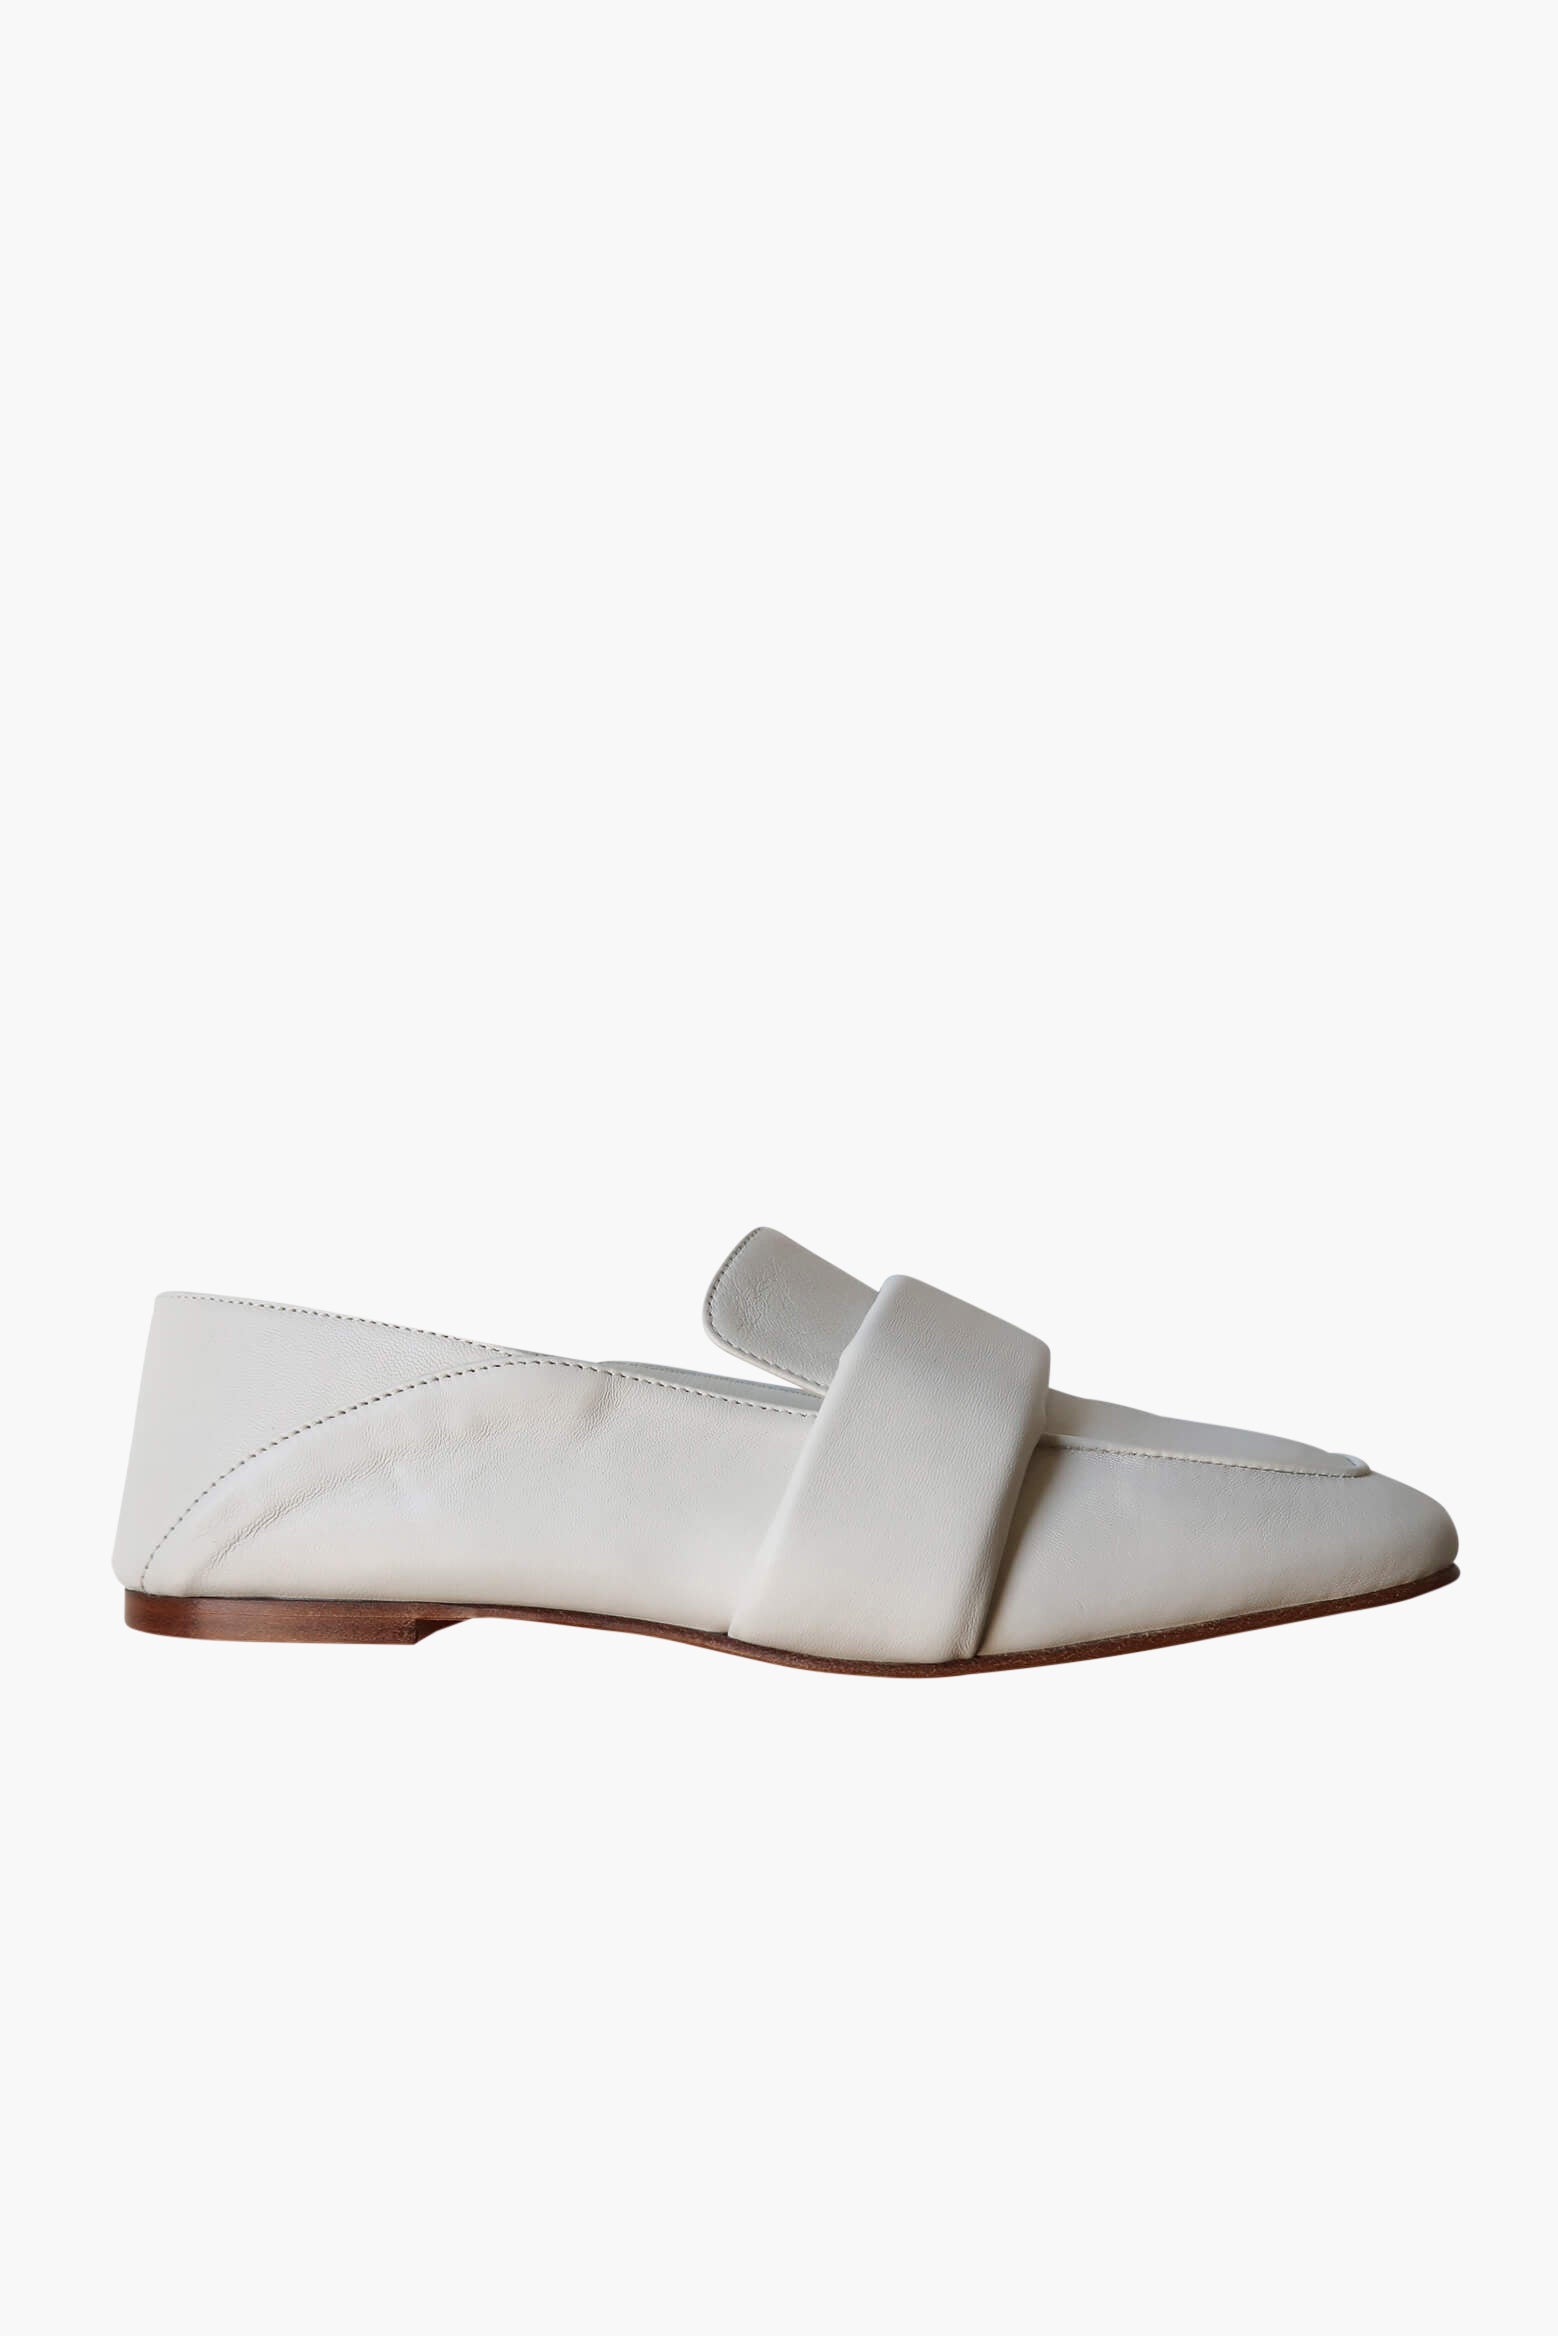 Bare Base Rolled Band Loafer in Off-White available at TNT The New Trend Australia. Free shipping on orders over $300 AUD.